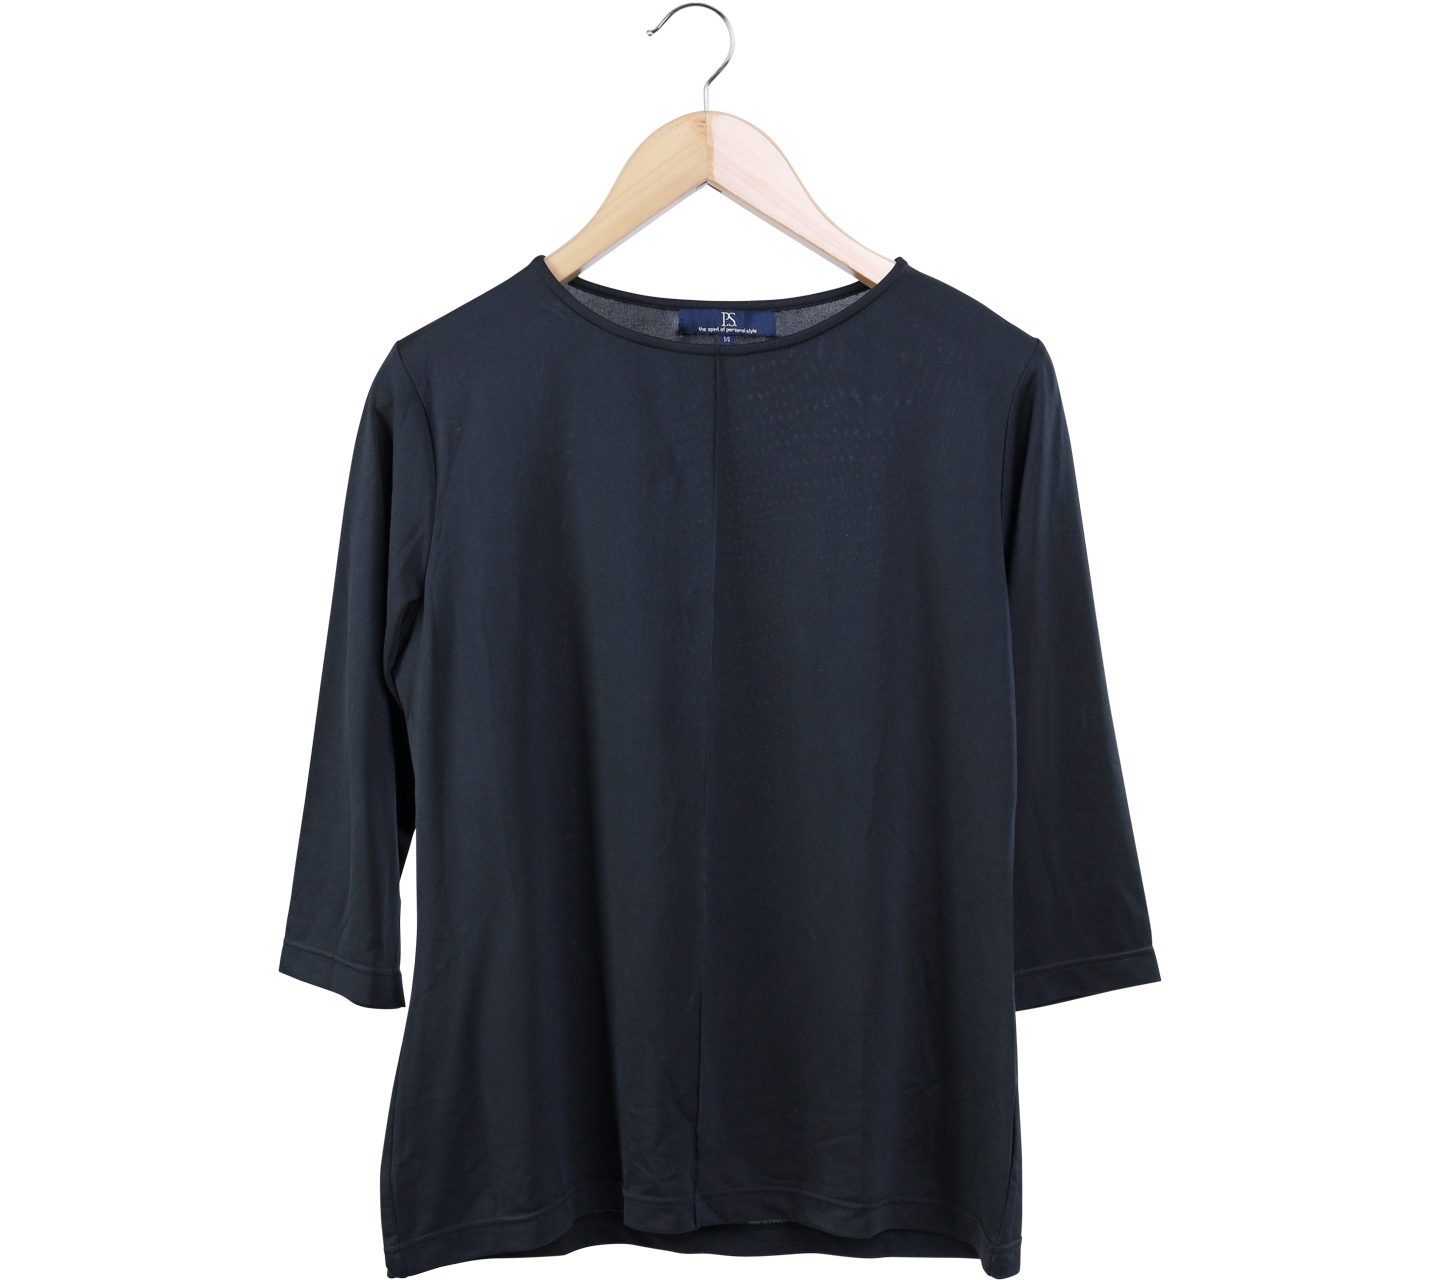 P.S. The Spirit Of Personal Style Black Blouse